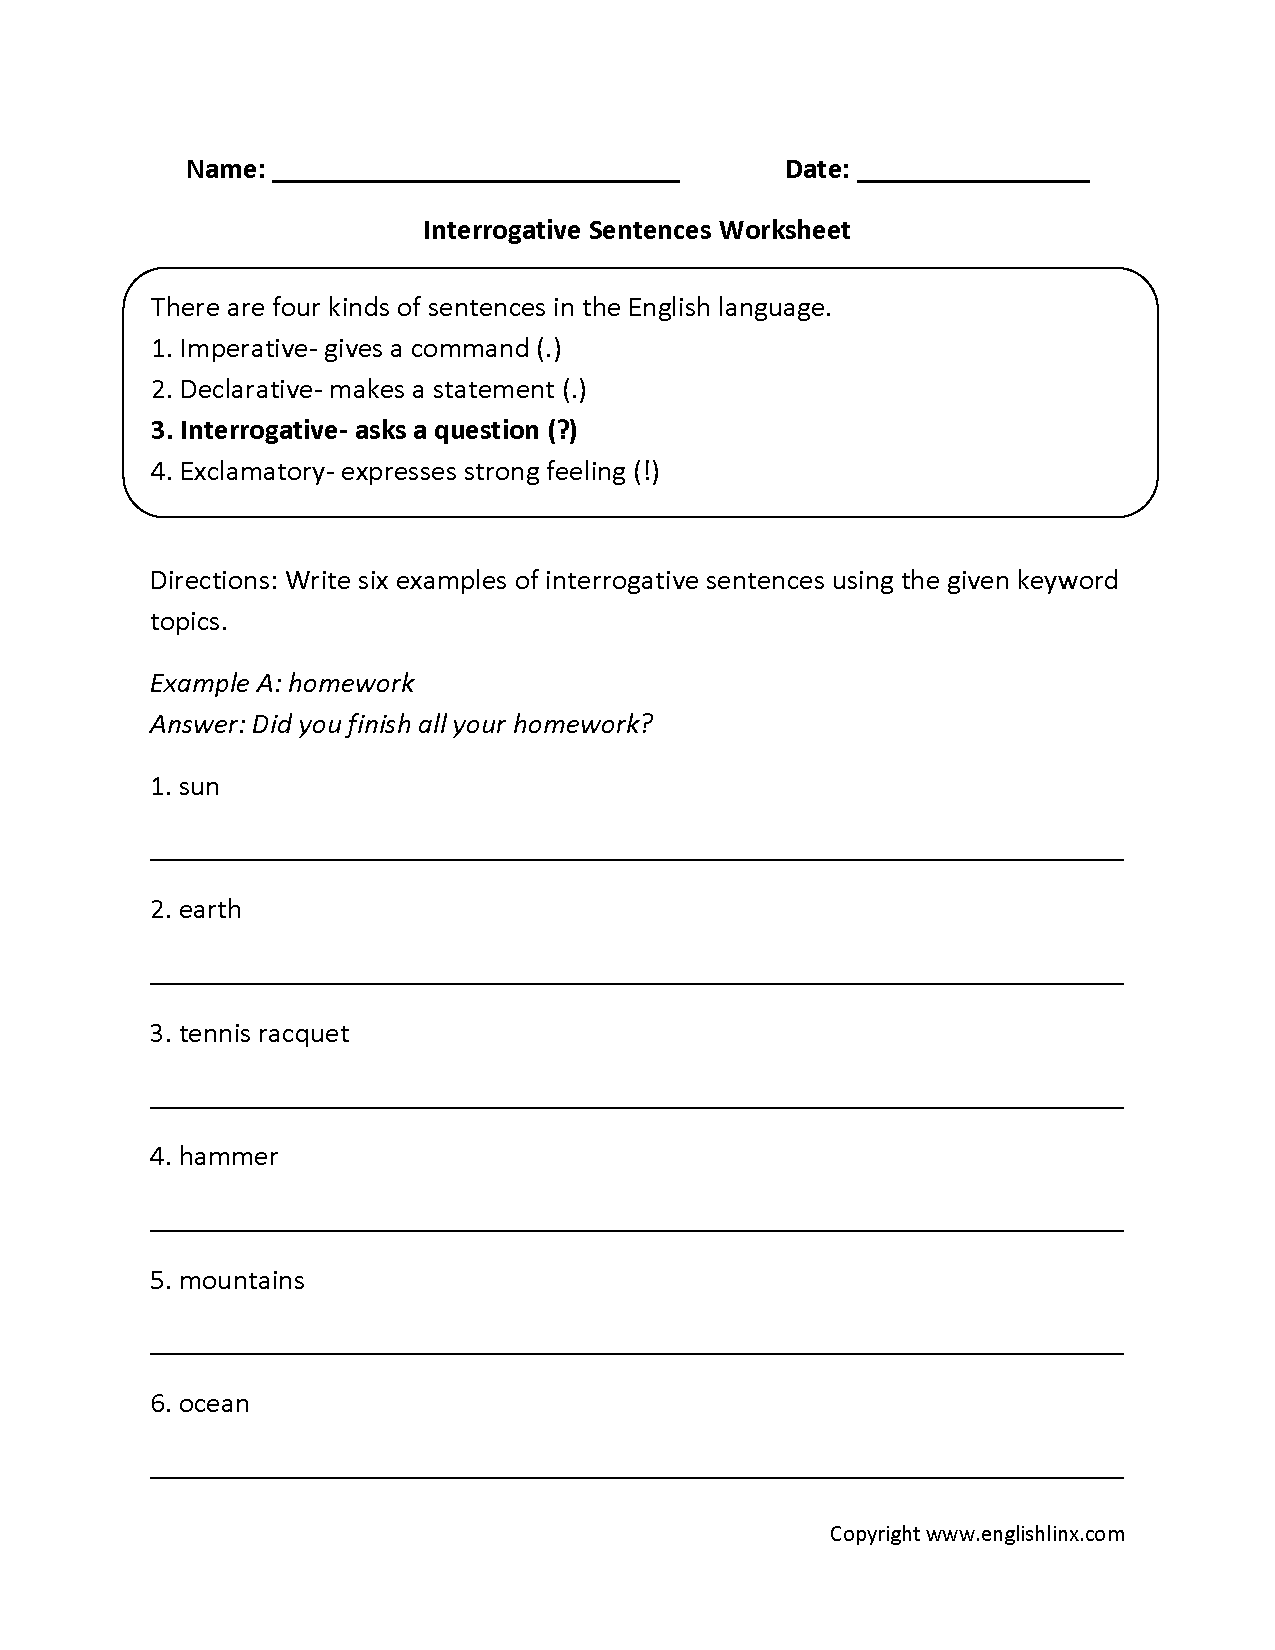 test-6th-grade-asking-giving-directions-and-interrogative-pronouns-exercises-esl-worksheet-by